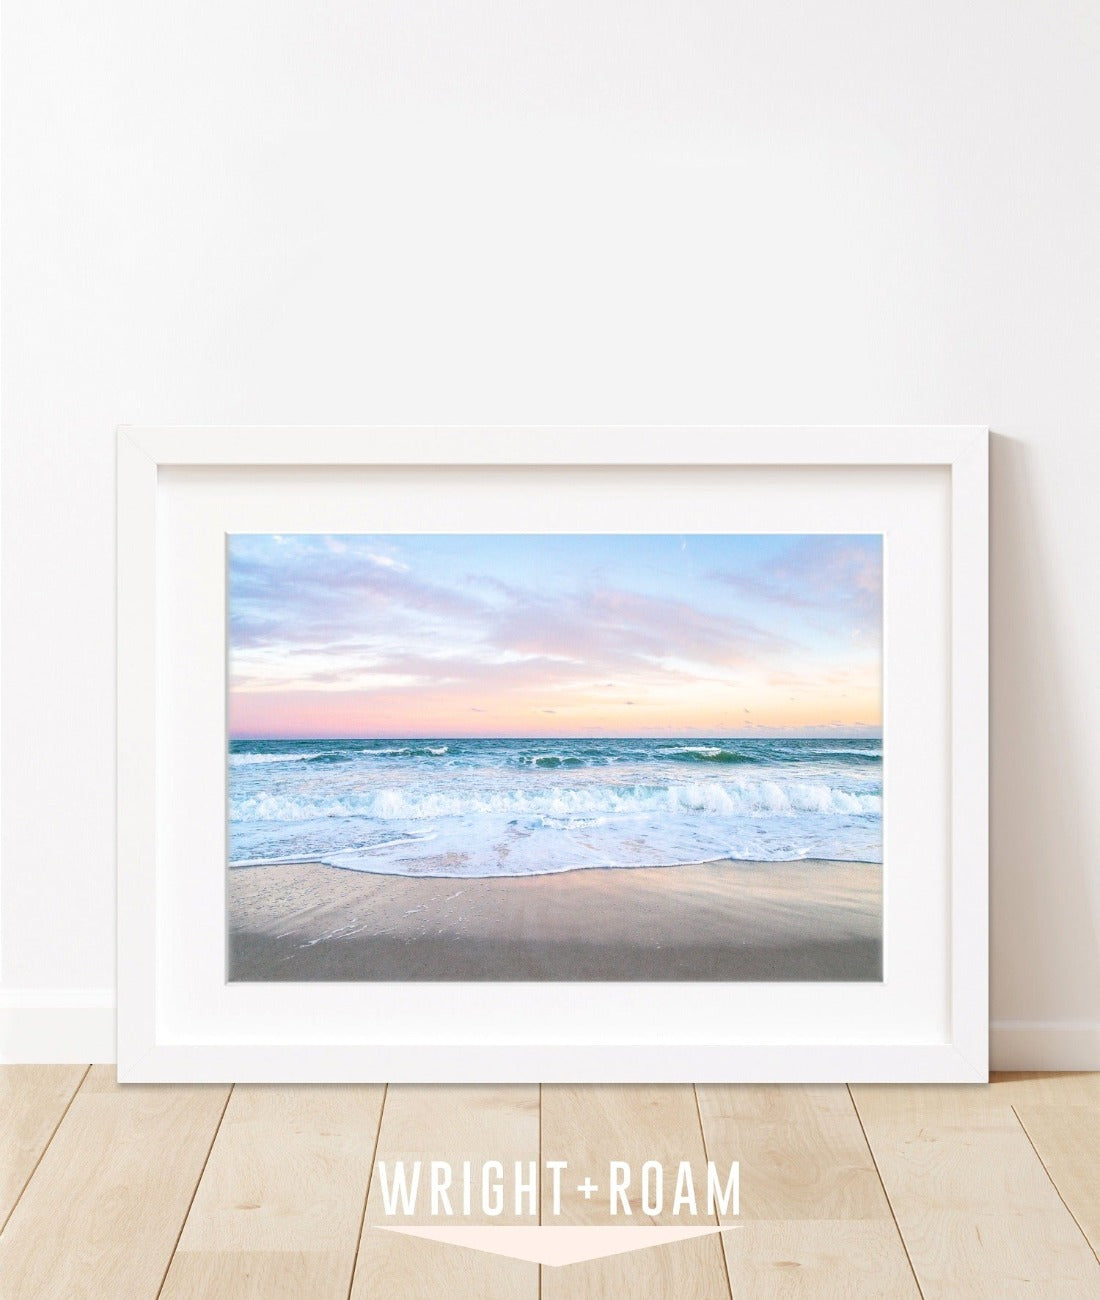 Blue Sunset Wrightsville Beach Print By Wright and Roam